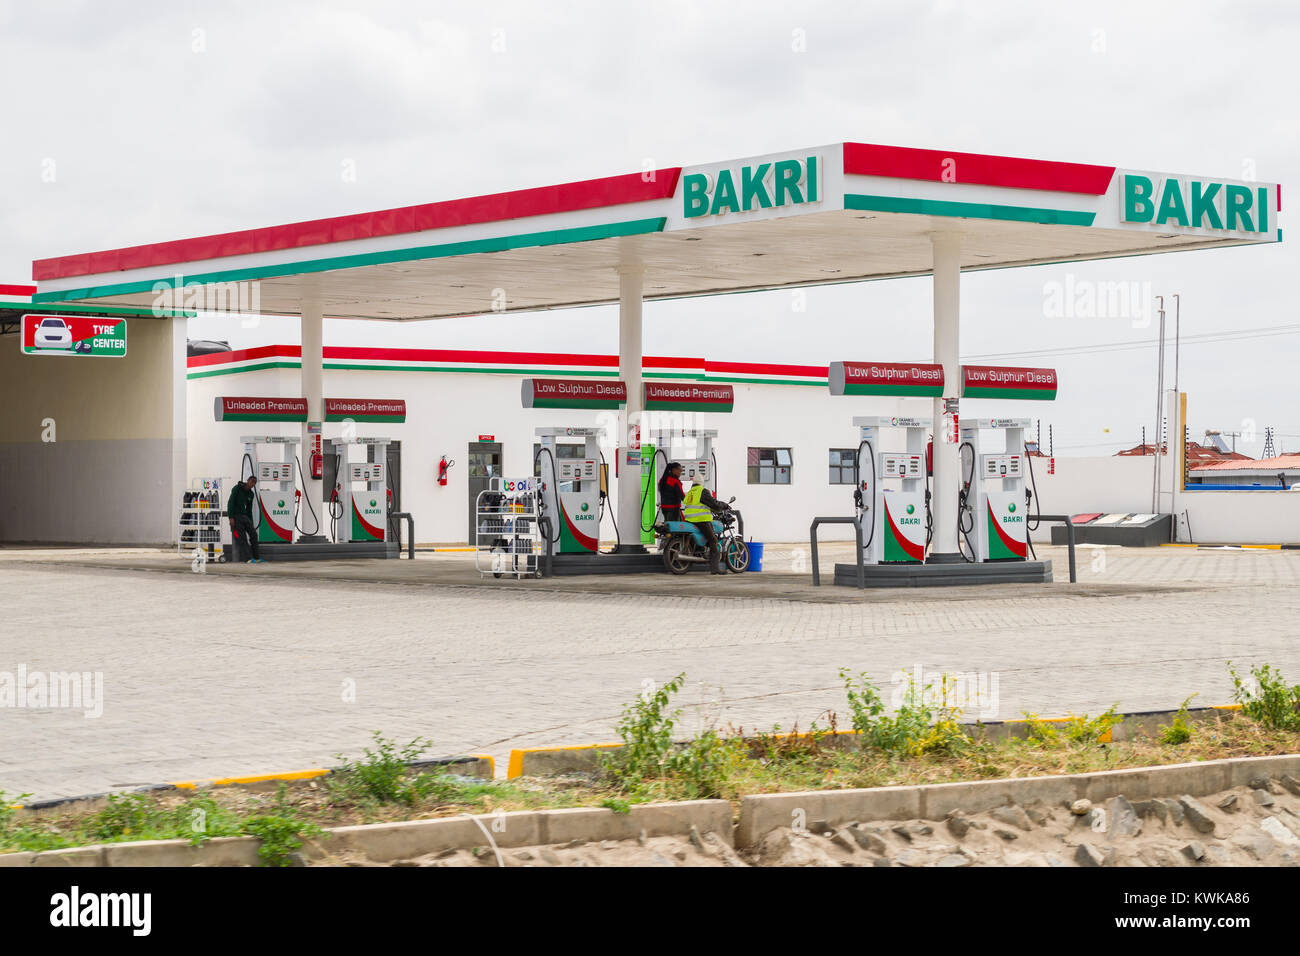 Bakri fuel station forecourt with customer and attendant at one of the petrol pumps, Kitengela, Kenya, East Africa Stock Photo